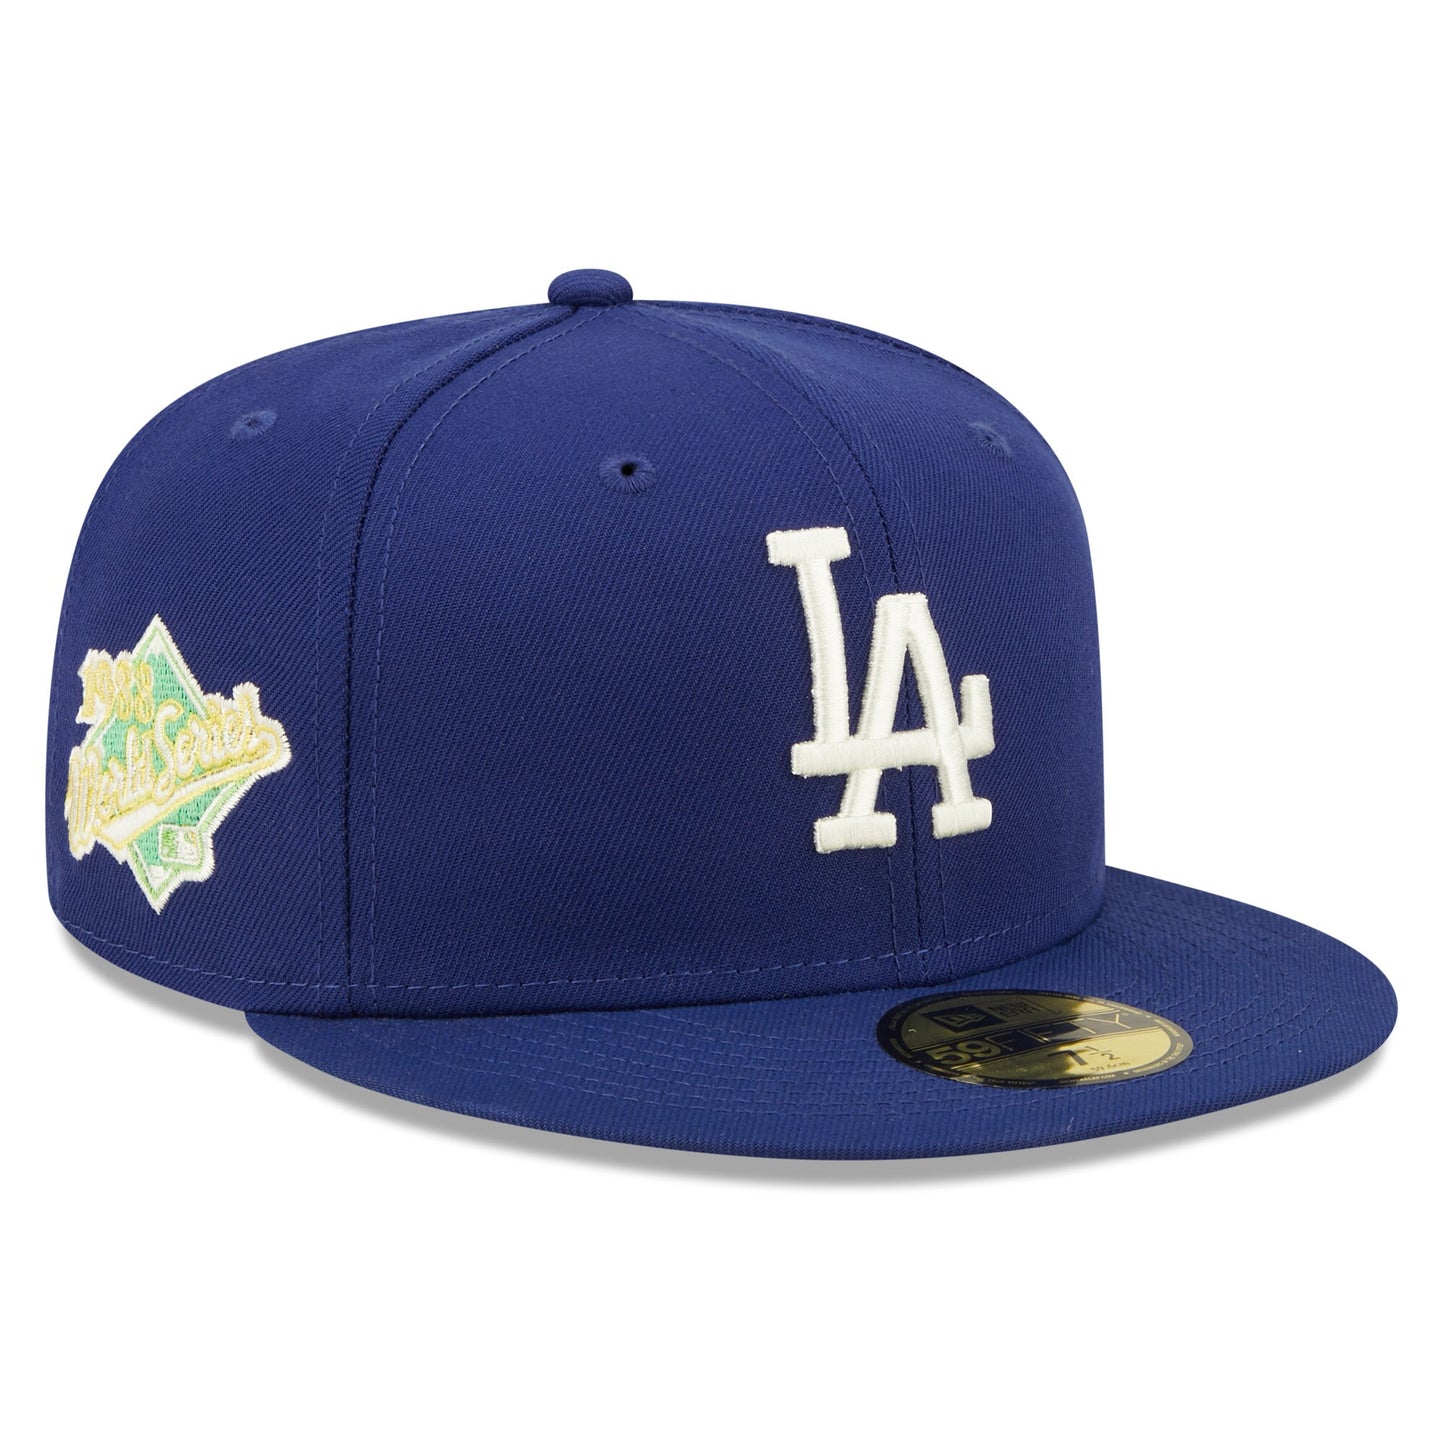 Los Angeles Dodgers New Era 1988 World Series Champions Citrus Pop UV 59FIFTY Fitted Hat - Royal